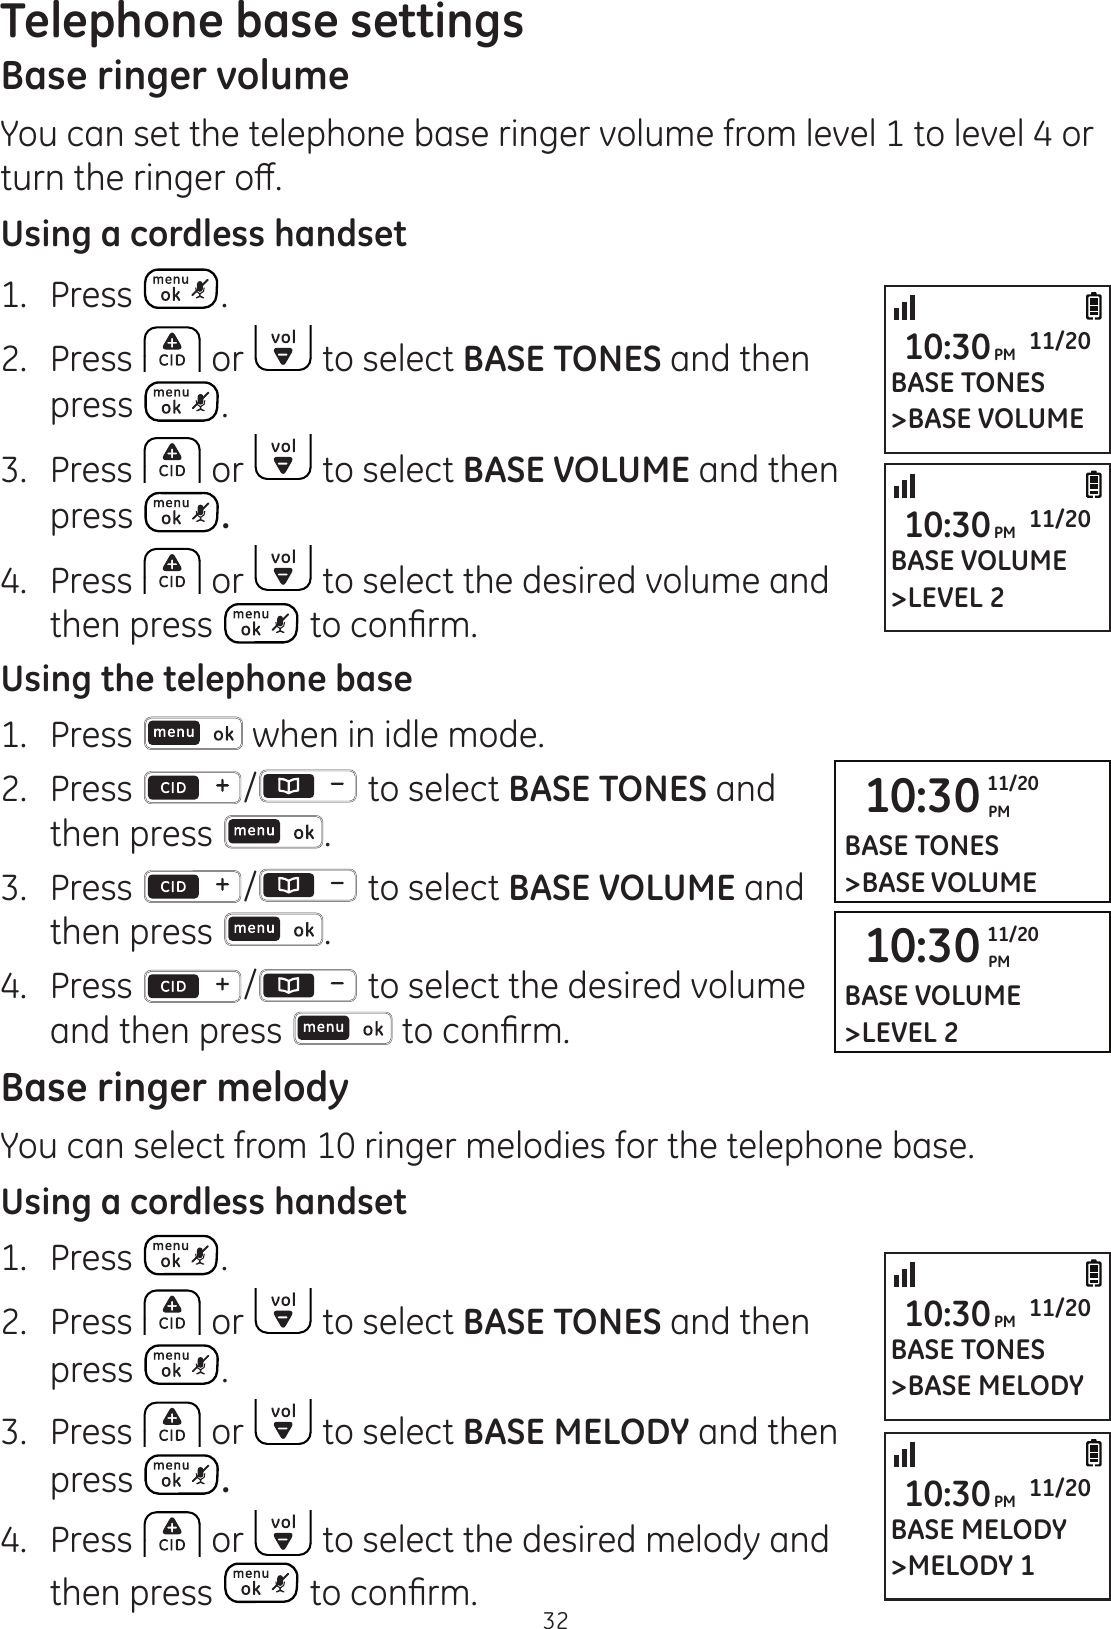 32Telephone base settingsBase ringer volumeYou can set the telephone base ringer volume from level 1 to level 4 or WXUQWKHULQJHURȺUsing a cordless handset1.  Press .2.  Press   or   to select BASE TONES and then press  .3.  Press   or   to select BASE VOLUME and then press  .4.  Press   or   to select the desired volume and then press  WRFRQ¿UPUsing the telephone base1.   Press   when in idle mode. 2.   Press  /  to select BASE TONES and then press  . 3.   Press  /  to select BASE VOLUME and then press  . 4.   Press  /  to select the desired volume and then press  WRFRQ¿UPBase ringer melodyYou can select from 10 ringer melodies for the telephone base. Using a cordless handset1.  Press  .2.  Press   or   to select BASE TONES and then press  .3.  Press   or   to select BASE MELODY and then press  .4.  Press   or   to select the desired melody and then press  WRFRQ¿UP10:30 PM11/20BASE TONES&gt;BASE VOLUME10:30 PM11/20BASE VOLUME&gt;LEVEL 2BASE VOLUME&gt;LEVEL 210:30PM 11/20BASE TONES&gt;BASE VOLUME10:30PM 11/20BASE TONES&gt;BASE MELODY10:30PM 11/20BASE MELODY&gt;MELODY 110:30PM 11/20